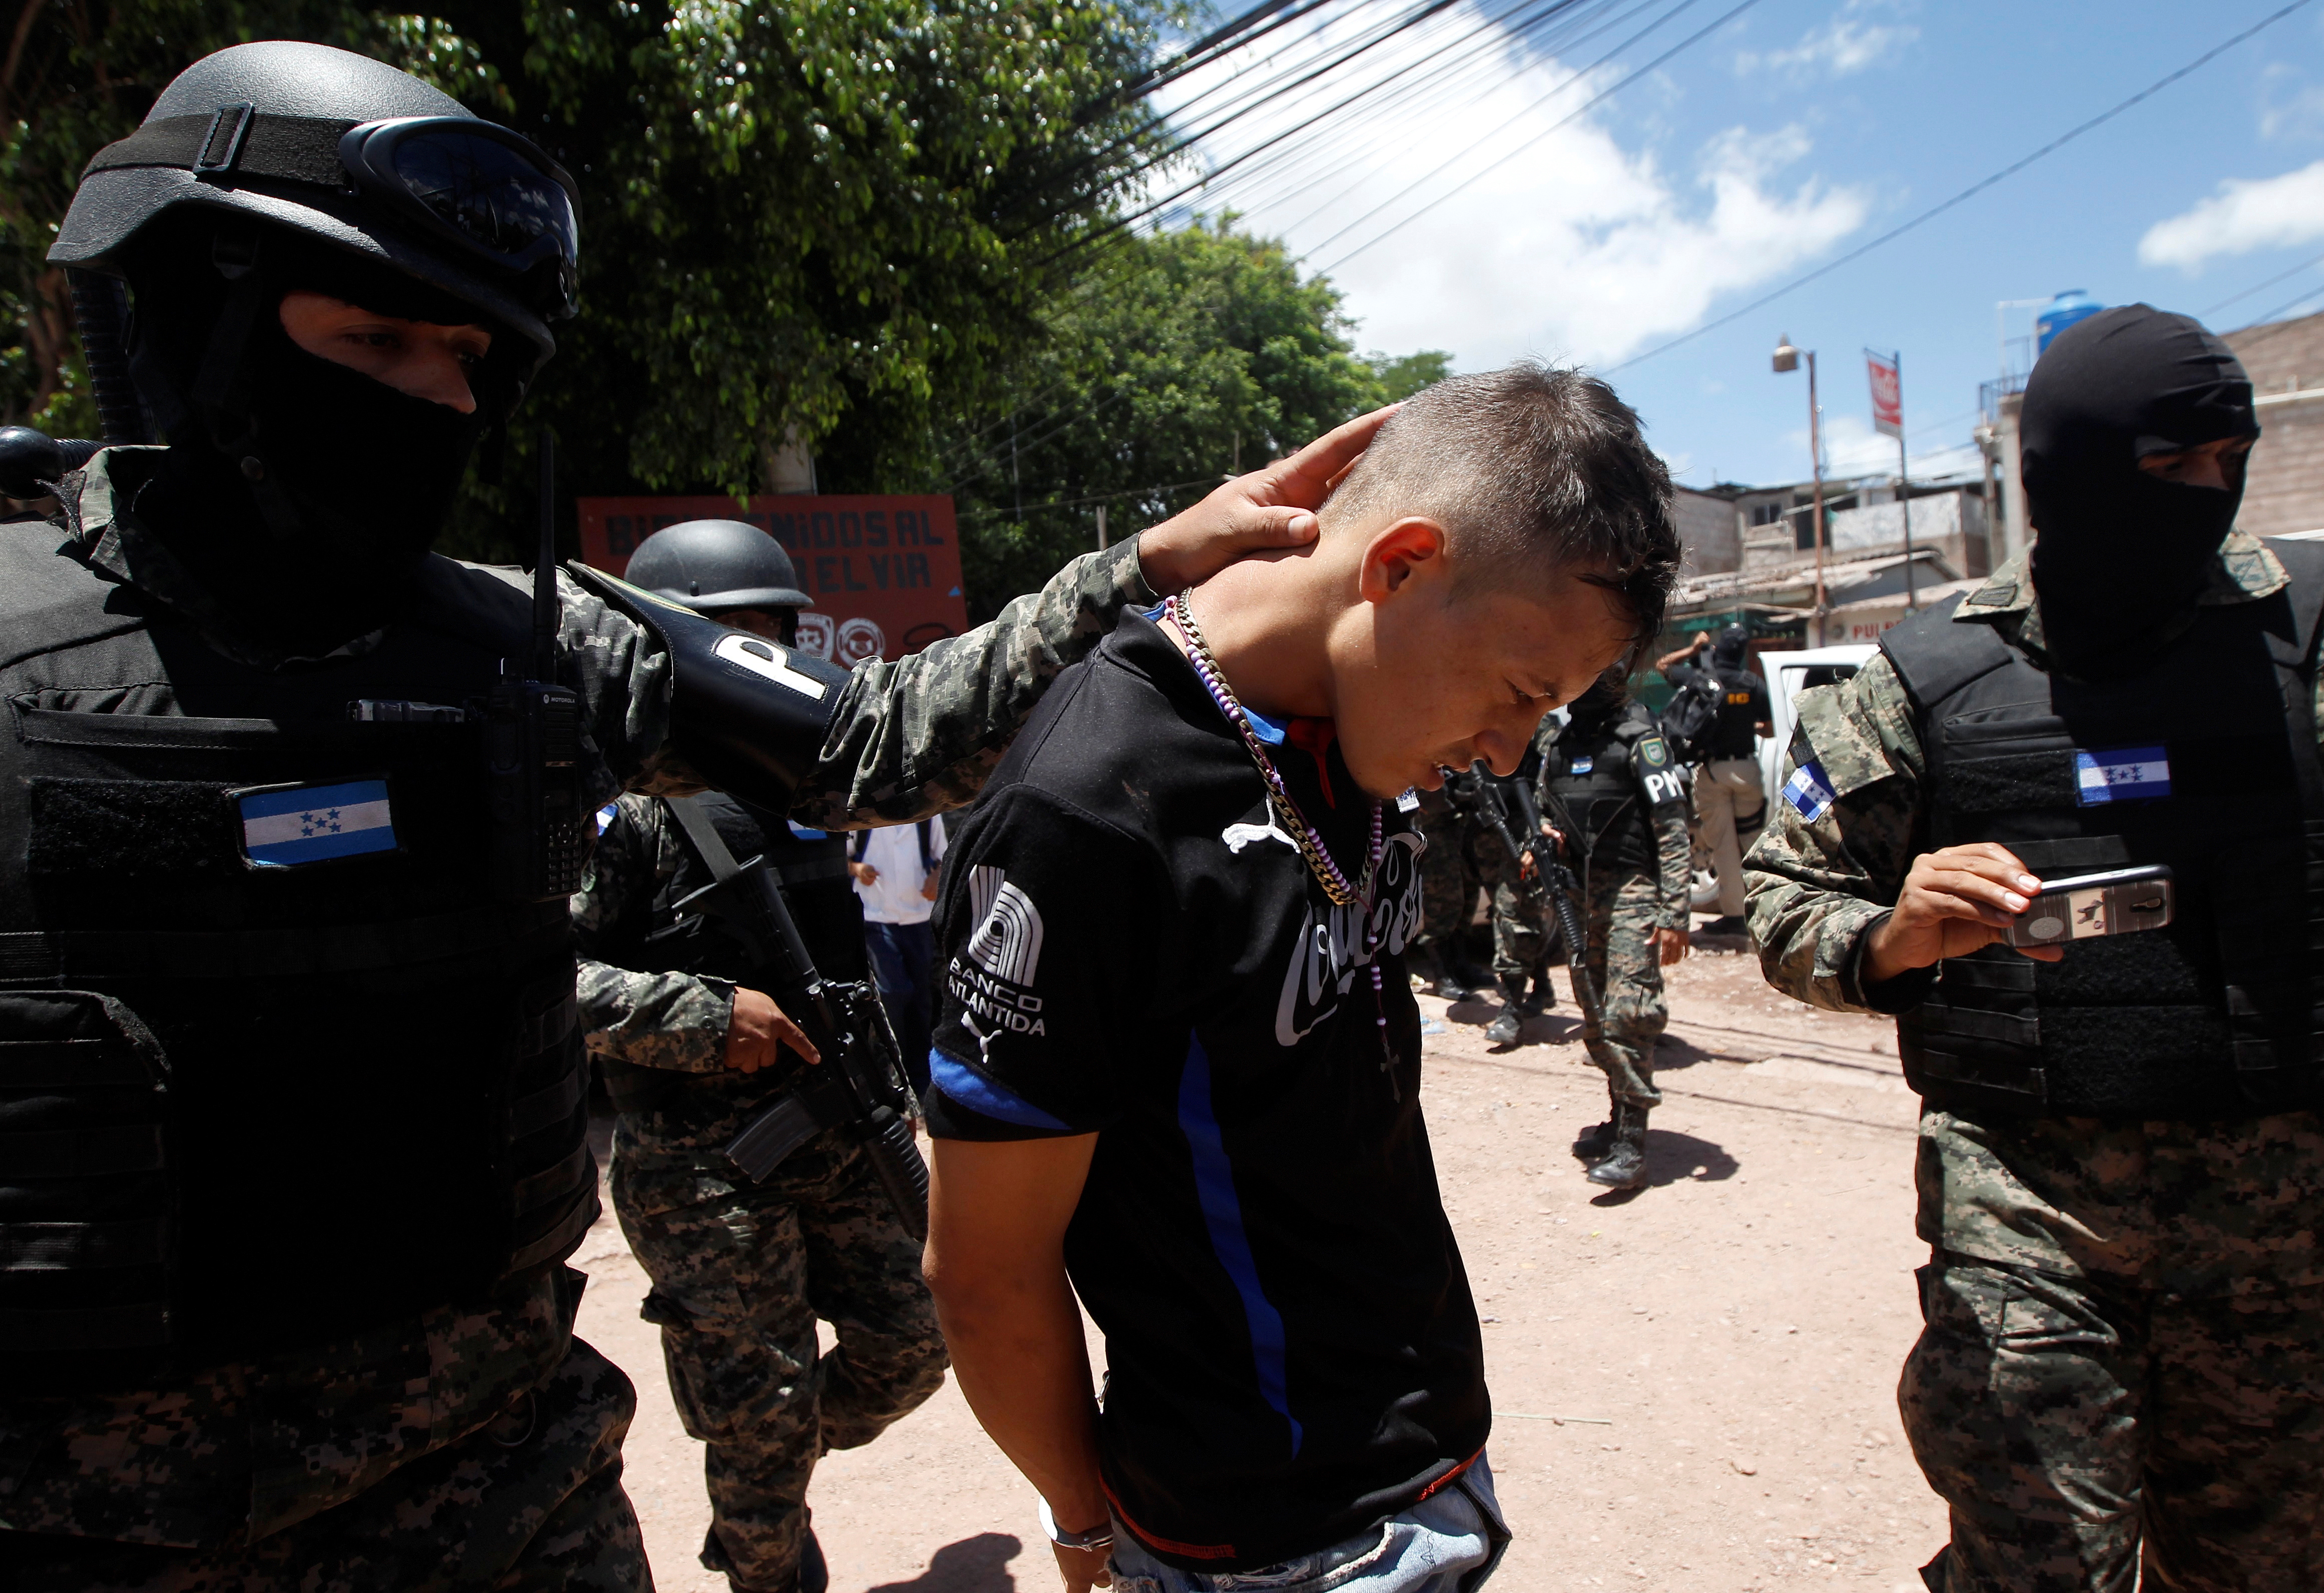 Military policemen escort a suspected MS-13 gang member detained during Operation Hunter, before taking him to police facilities for an investigation on a clandestine mass grave where the gang buried their victims, according to local media, in Tegucigalpa